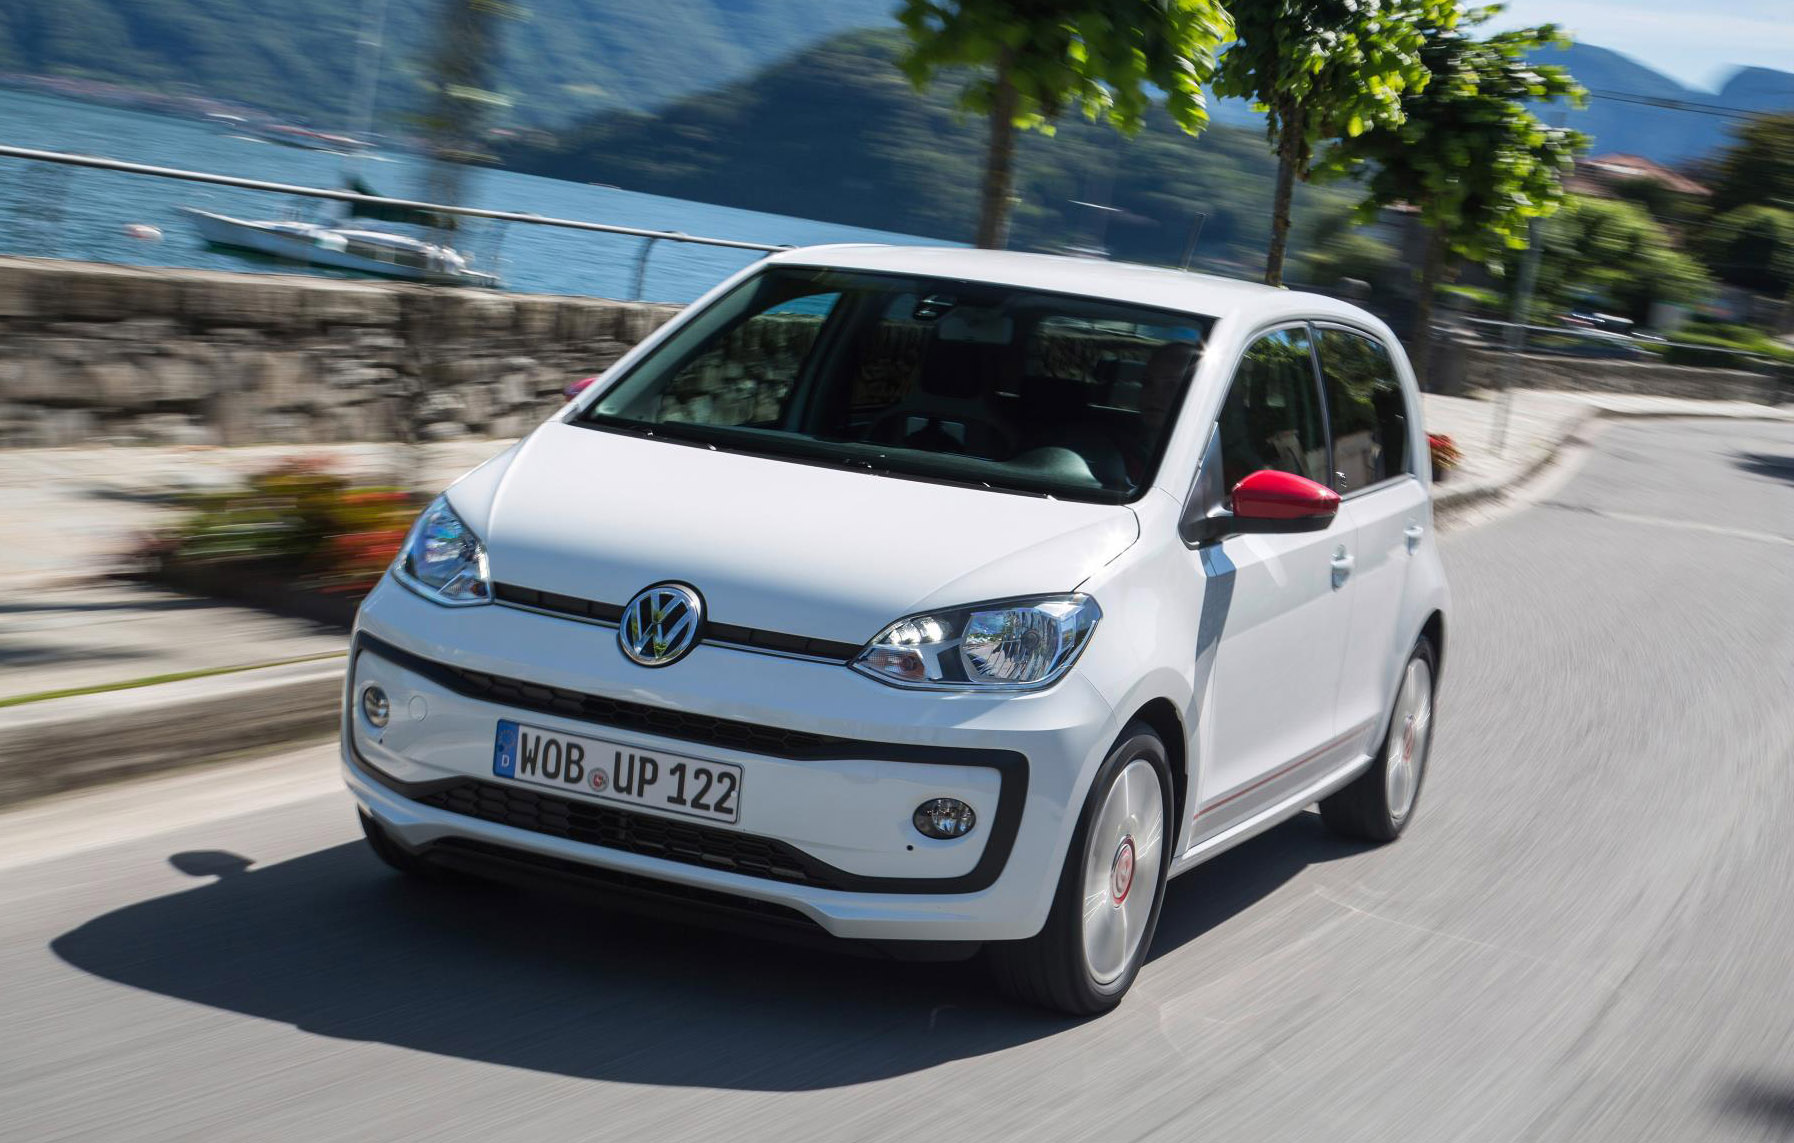 Volkswagen Up 1.0 TSI - prices, specs and 0-60 time